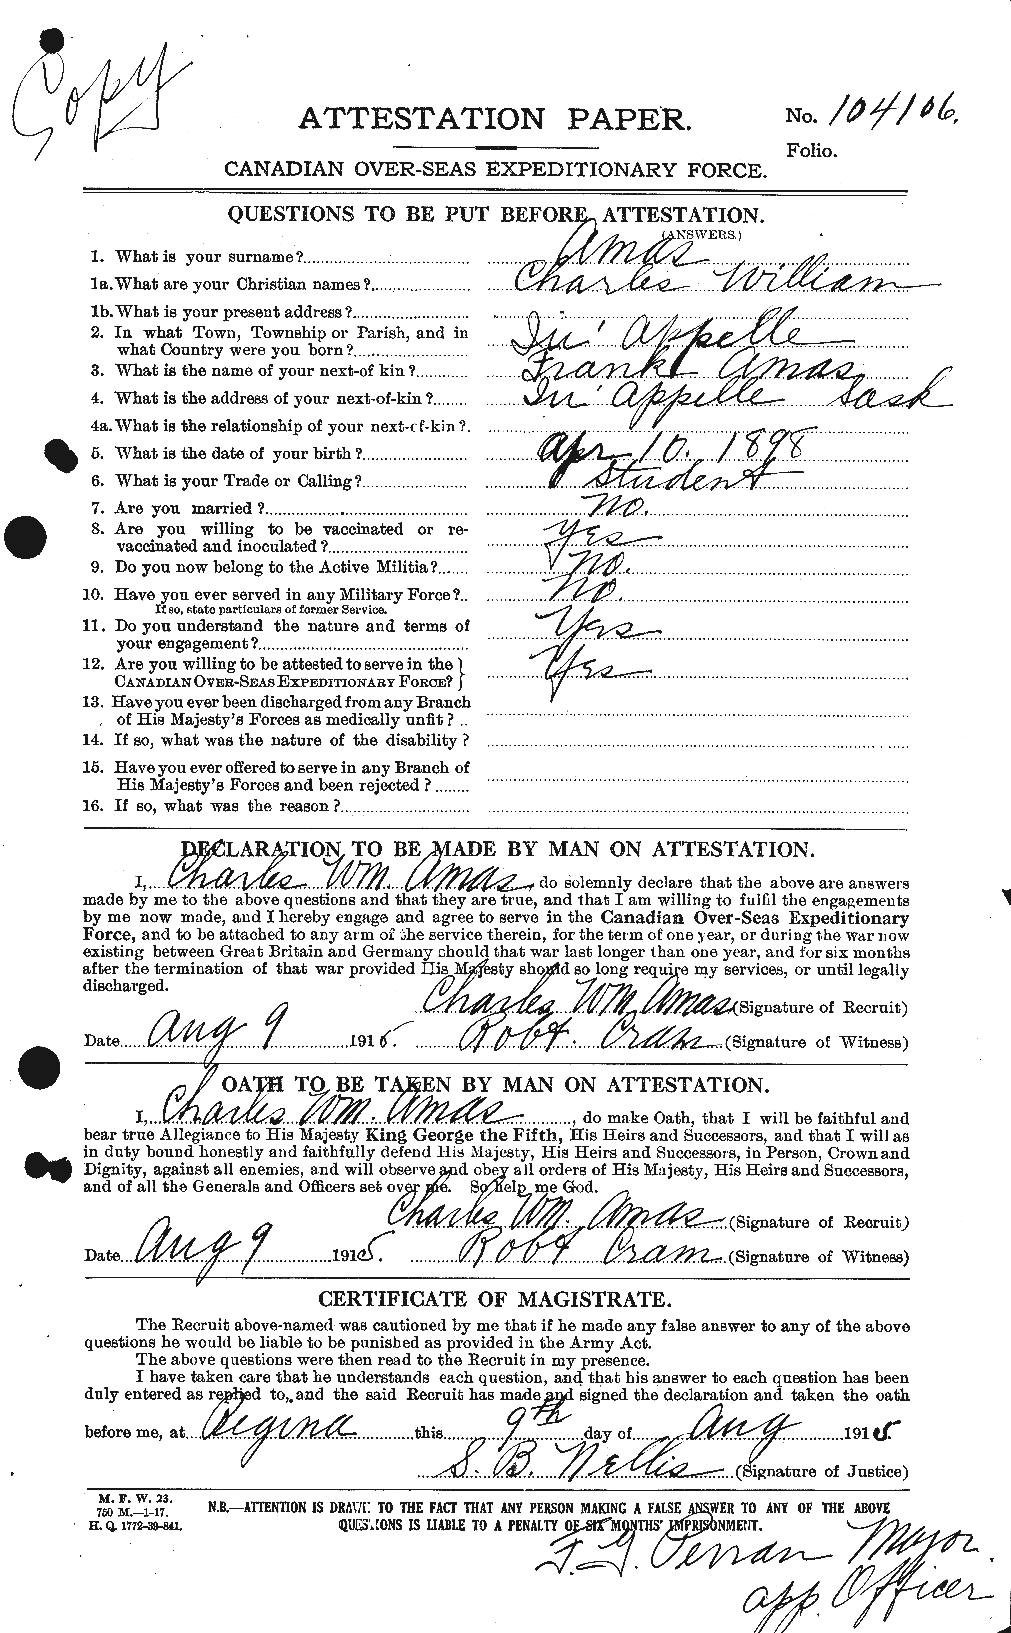 Personnel Records of the First World War - CEF 209000a